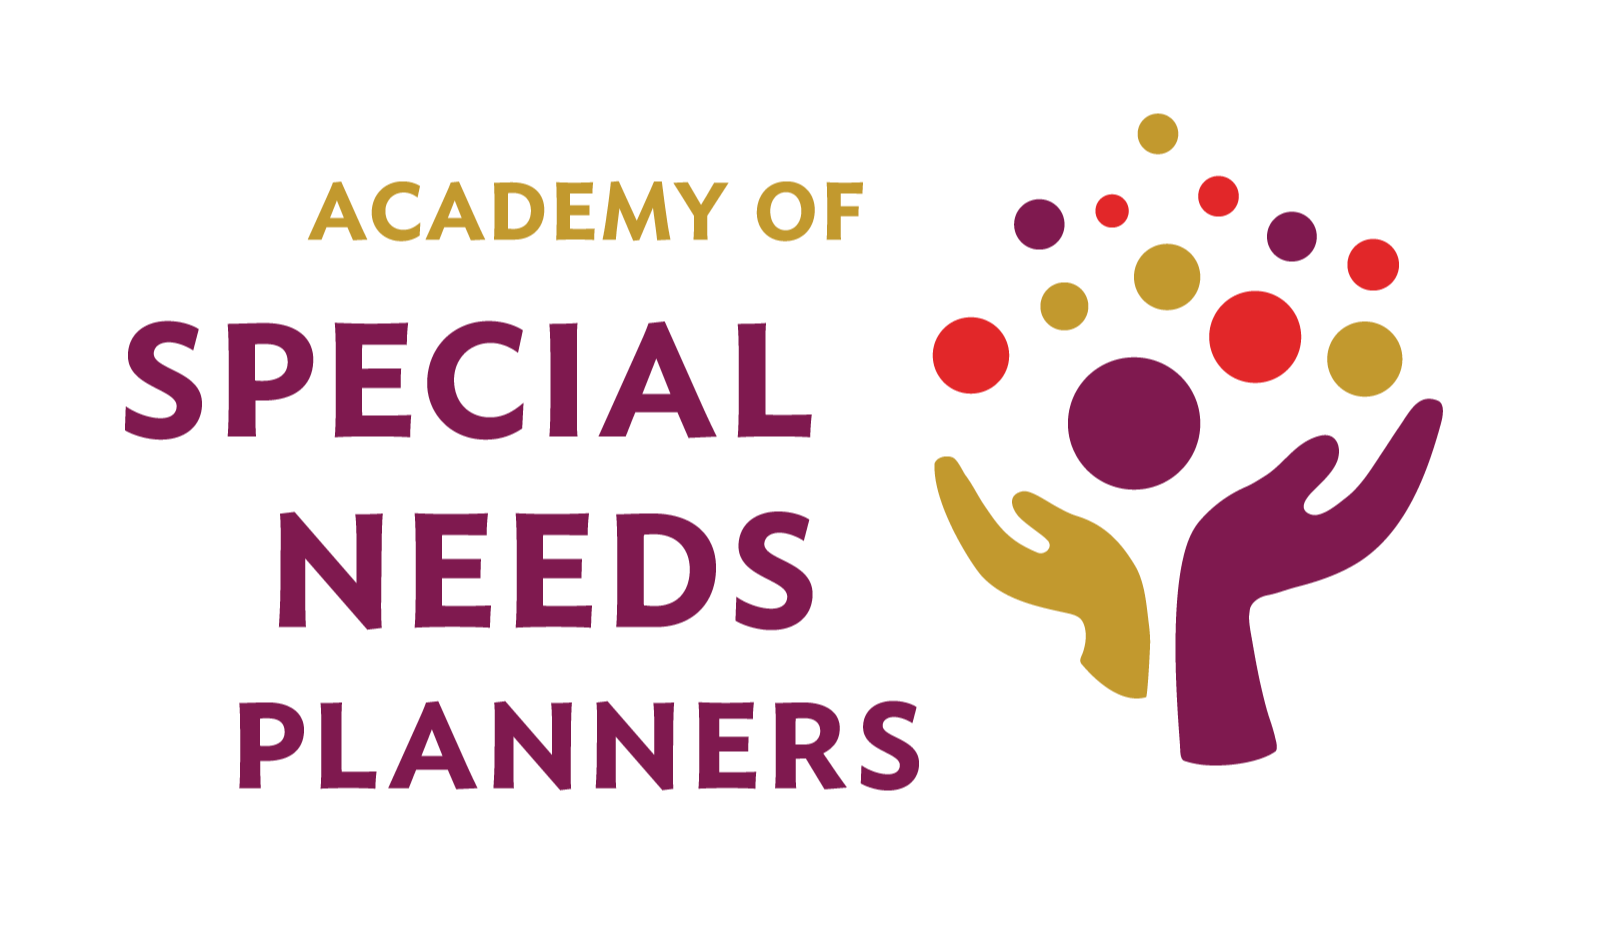 Academy Of Special Needs Planners